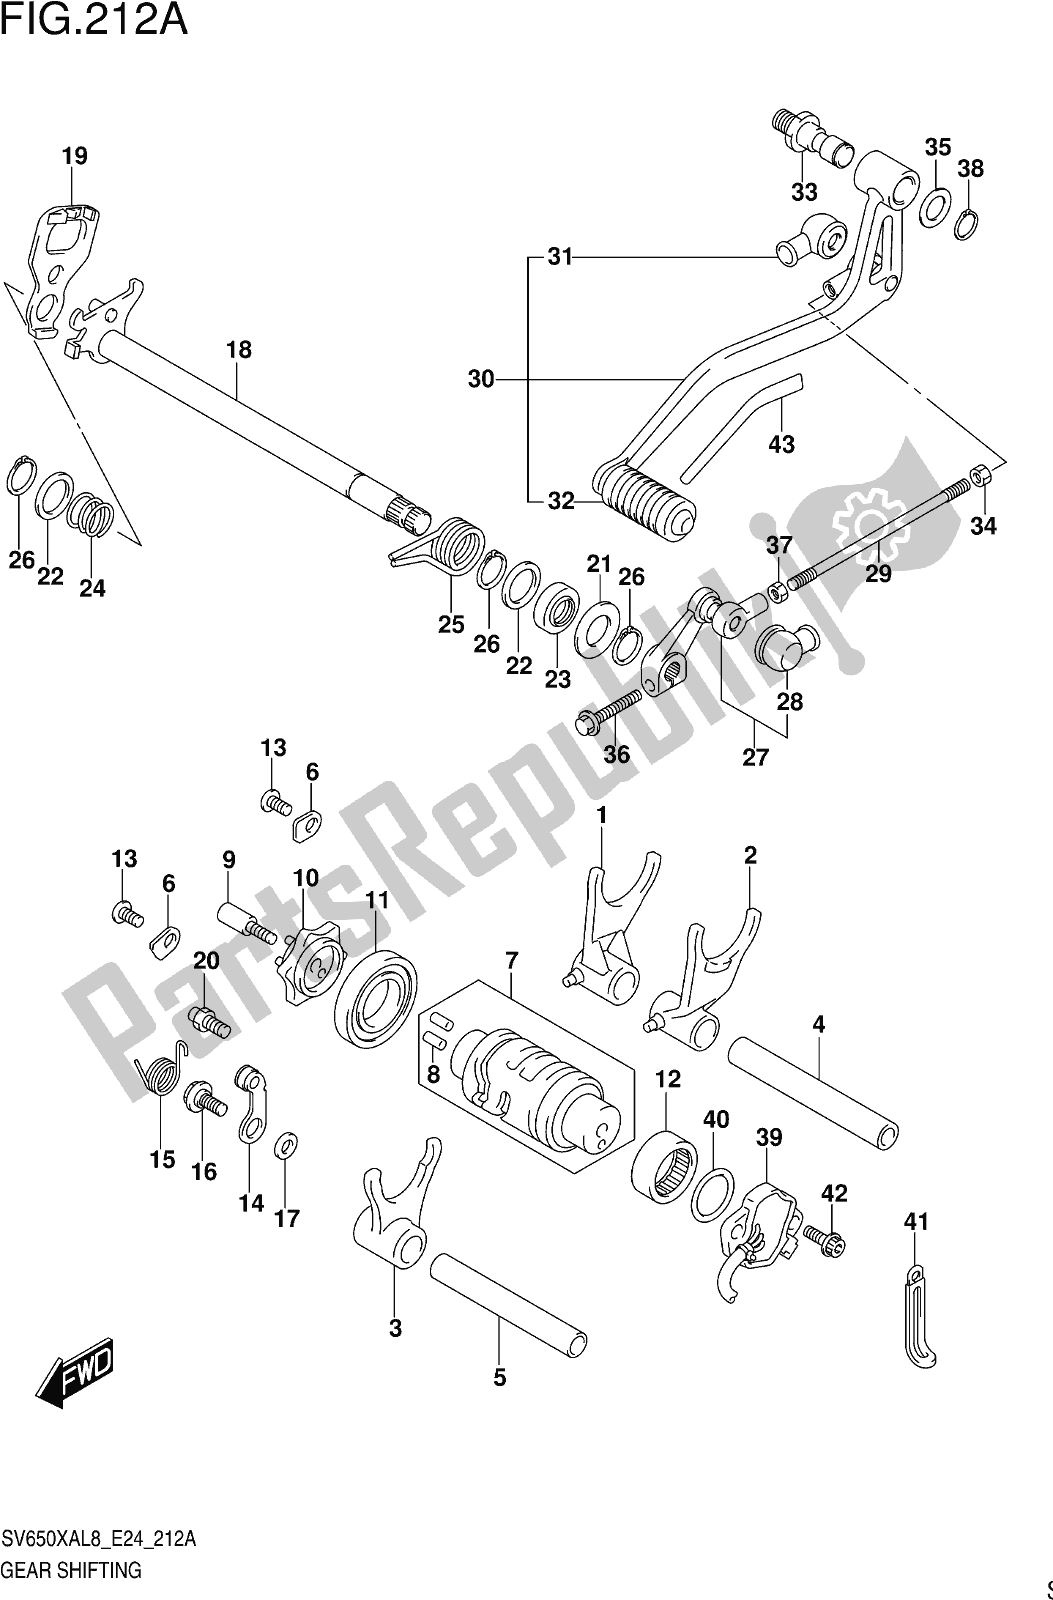 All parts for the Fig. 212a Gear Shifting of the Suzuki SV 650 XA 2018